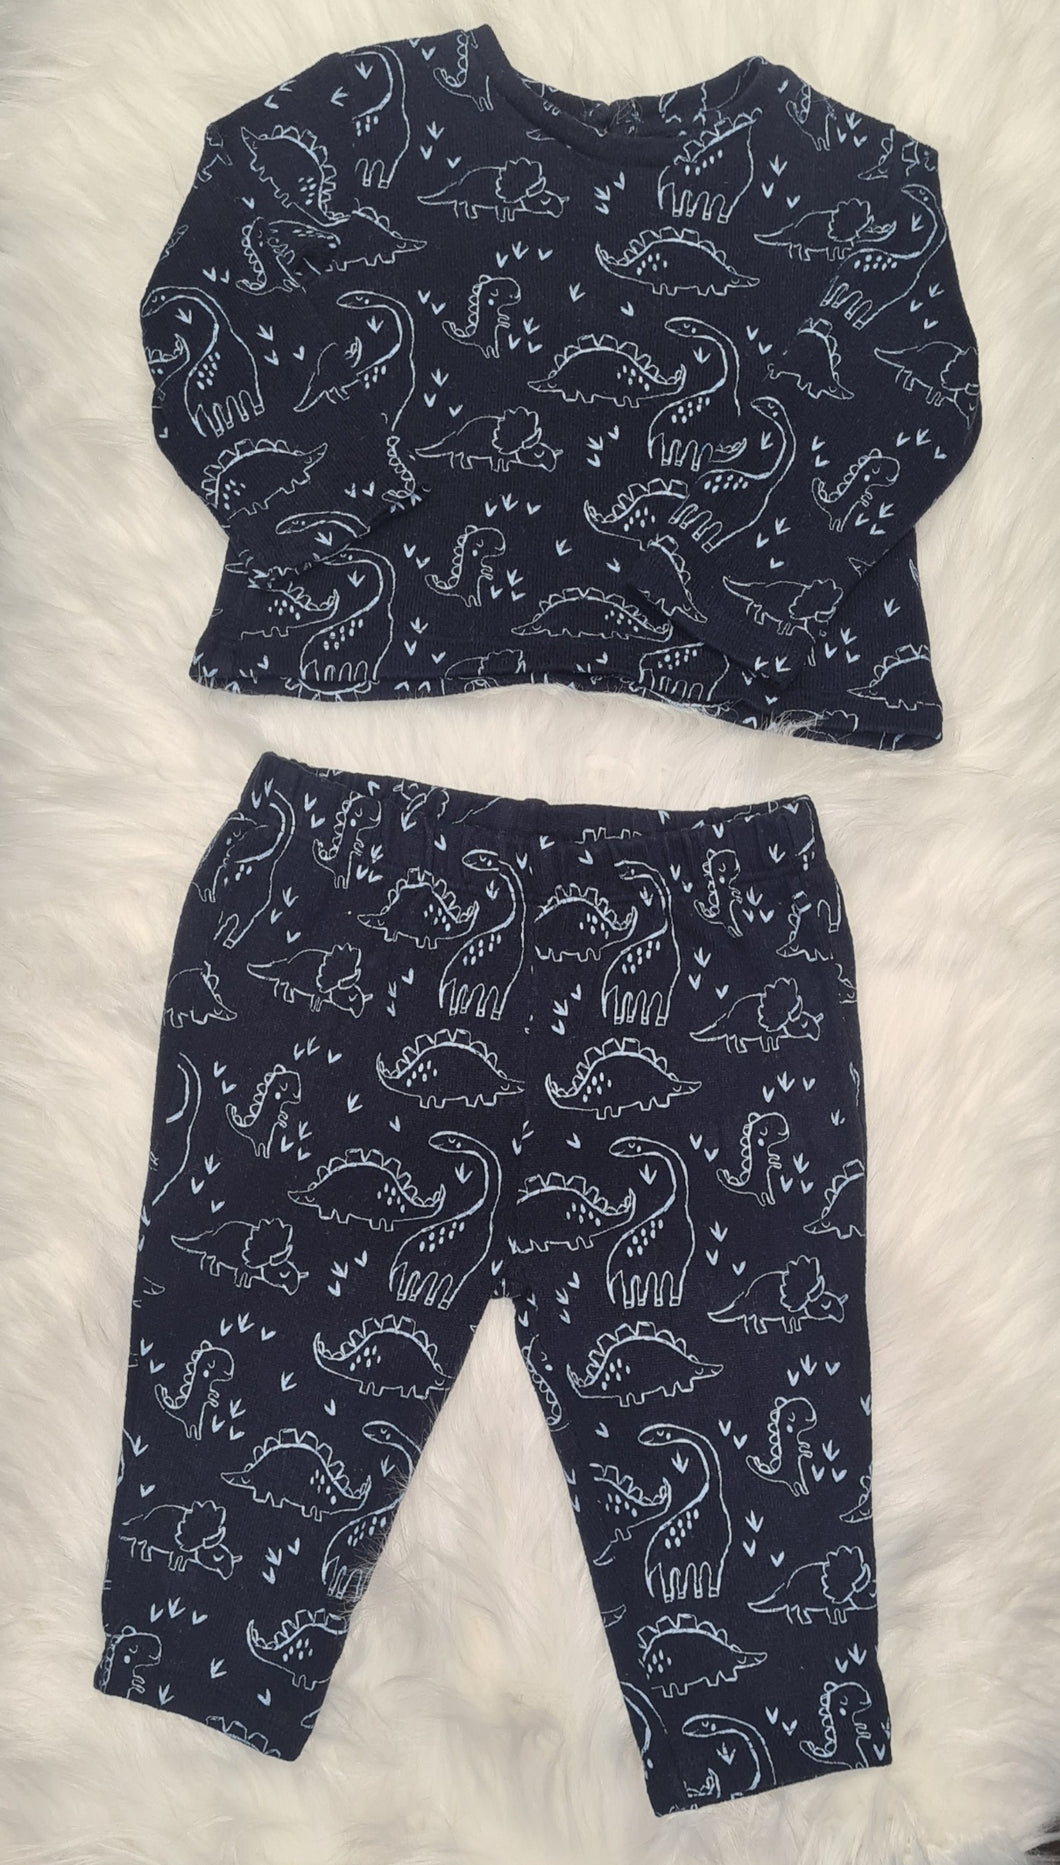 Boys 6-9 Month - Dinosaur Long Sleeve Top and Leggings set - Blue and White